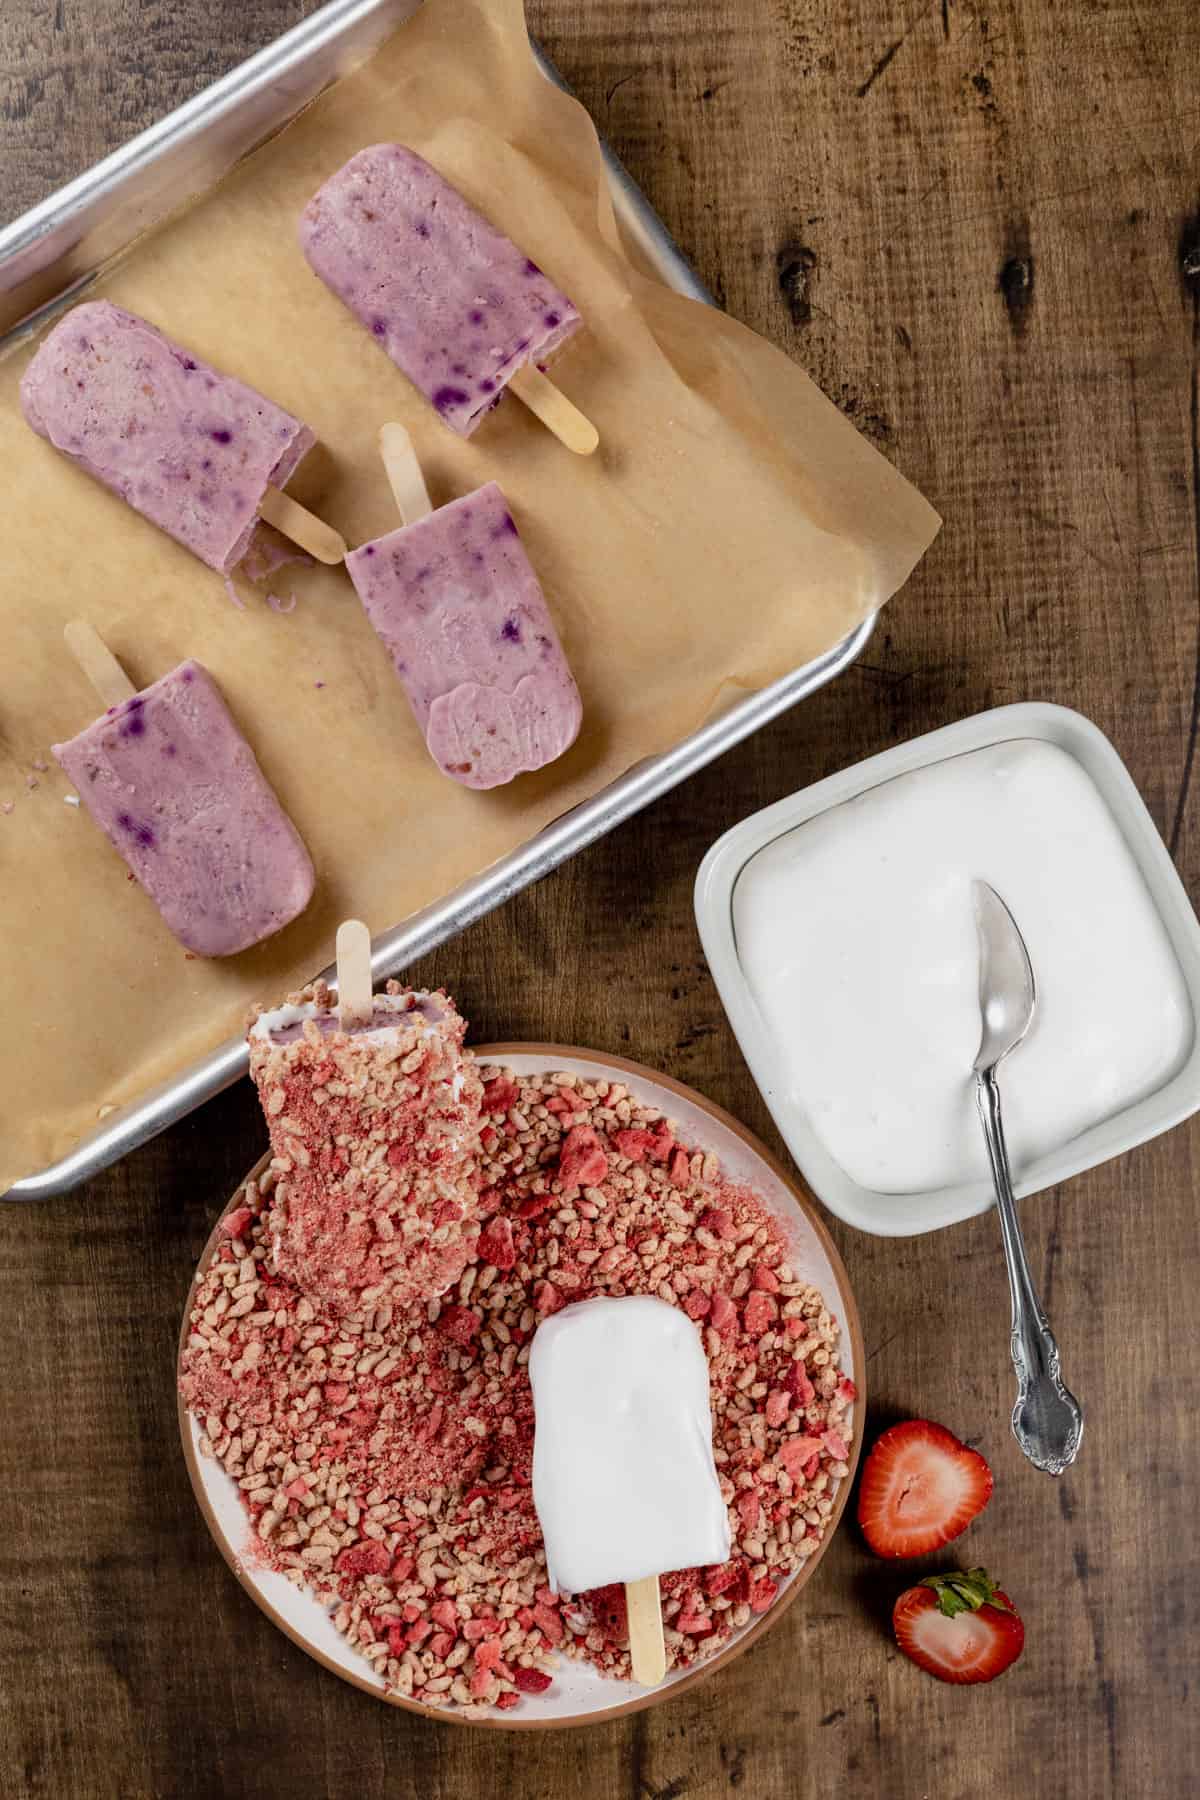 A plate filled with the strawberry crumb mixture, a bowl filled with dairy free whipped cream, and a tray filled with the strawberry shortcake ice cream bars.